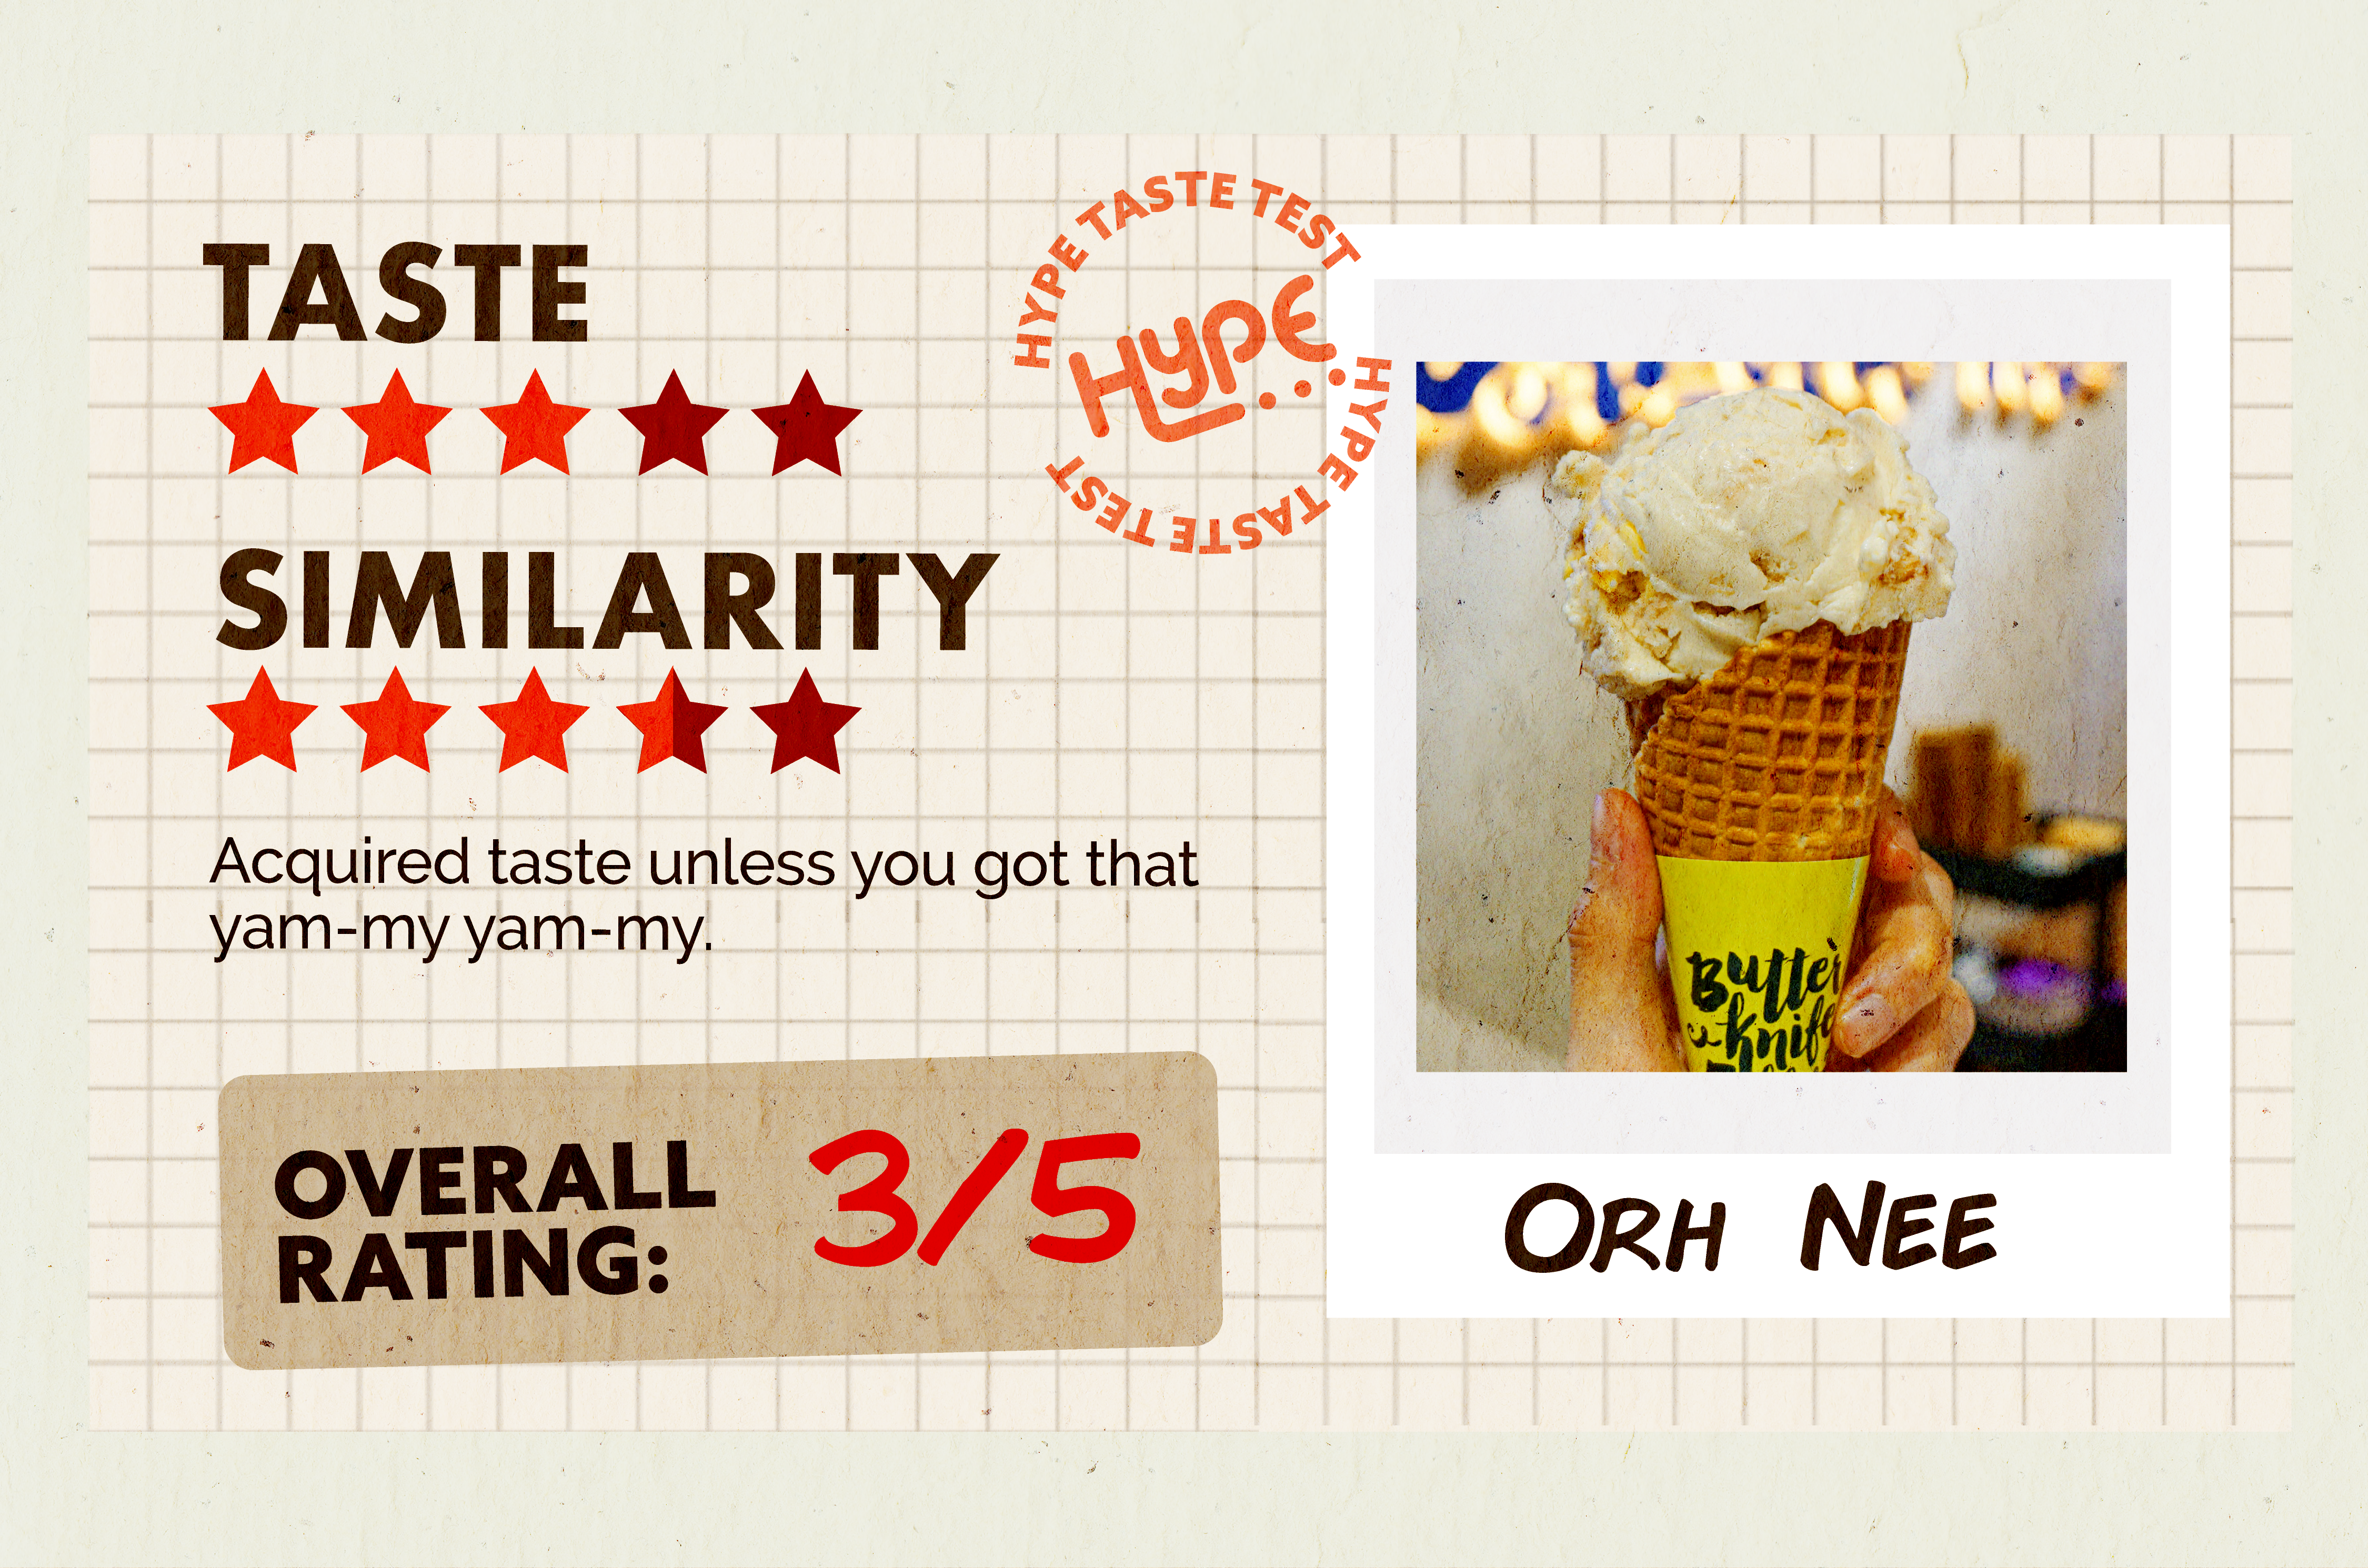 HYPE's rating for Orh Nee ice cream, 3/5